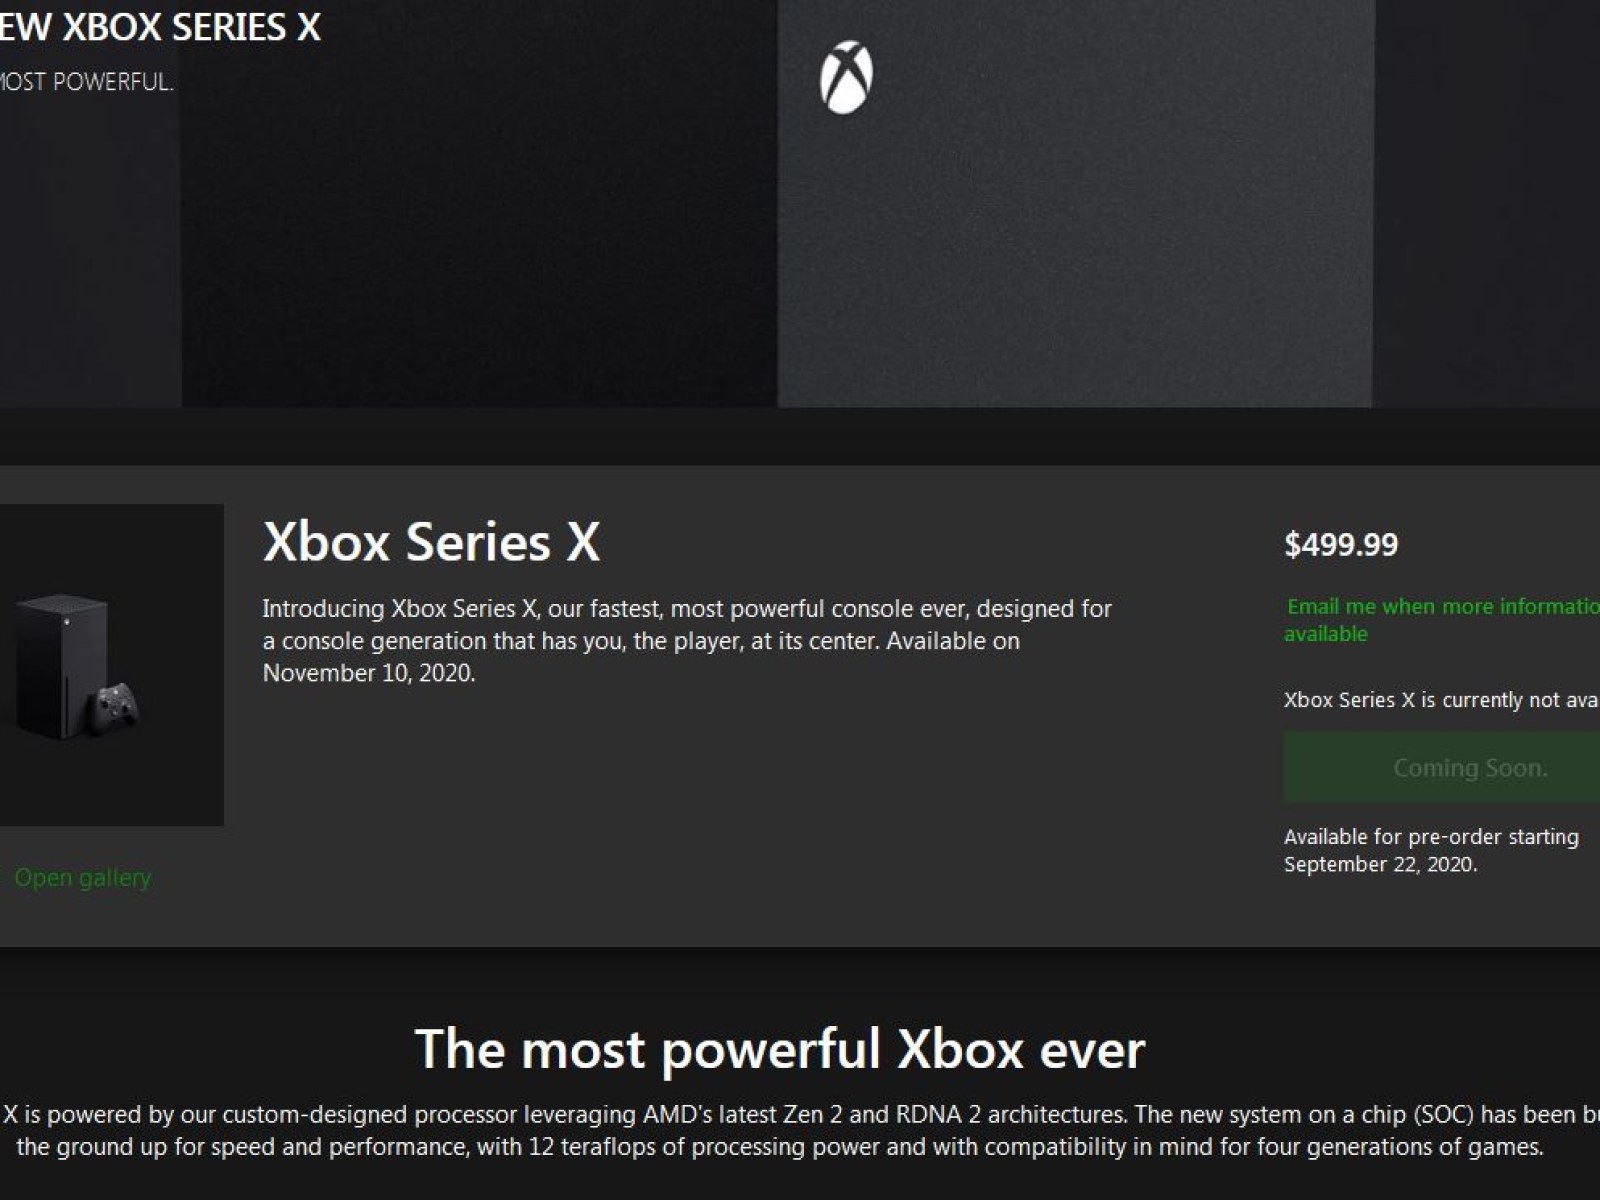 How to Pre-Order Xbox Series X, Series S in India: Price, Offers